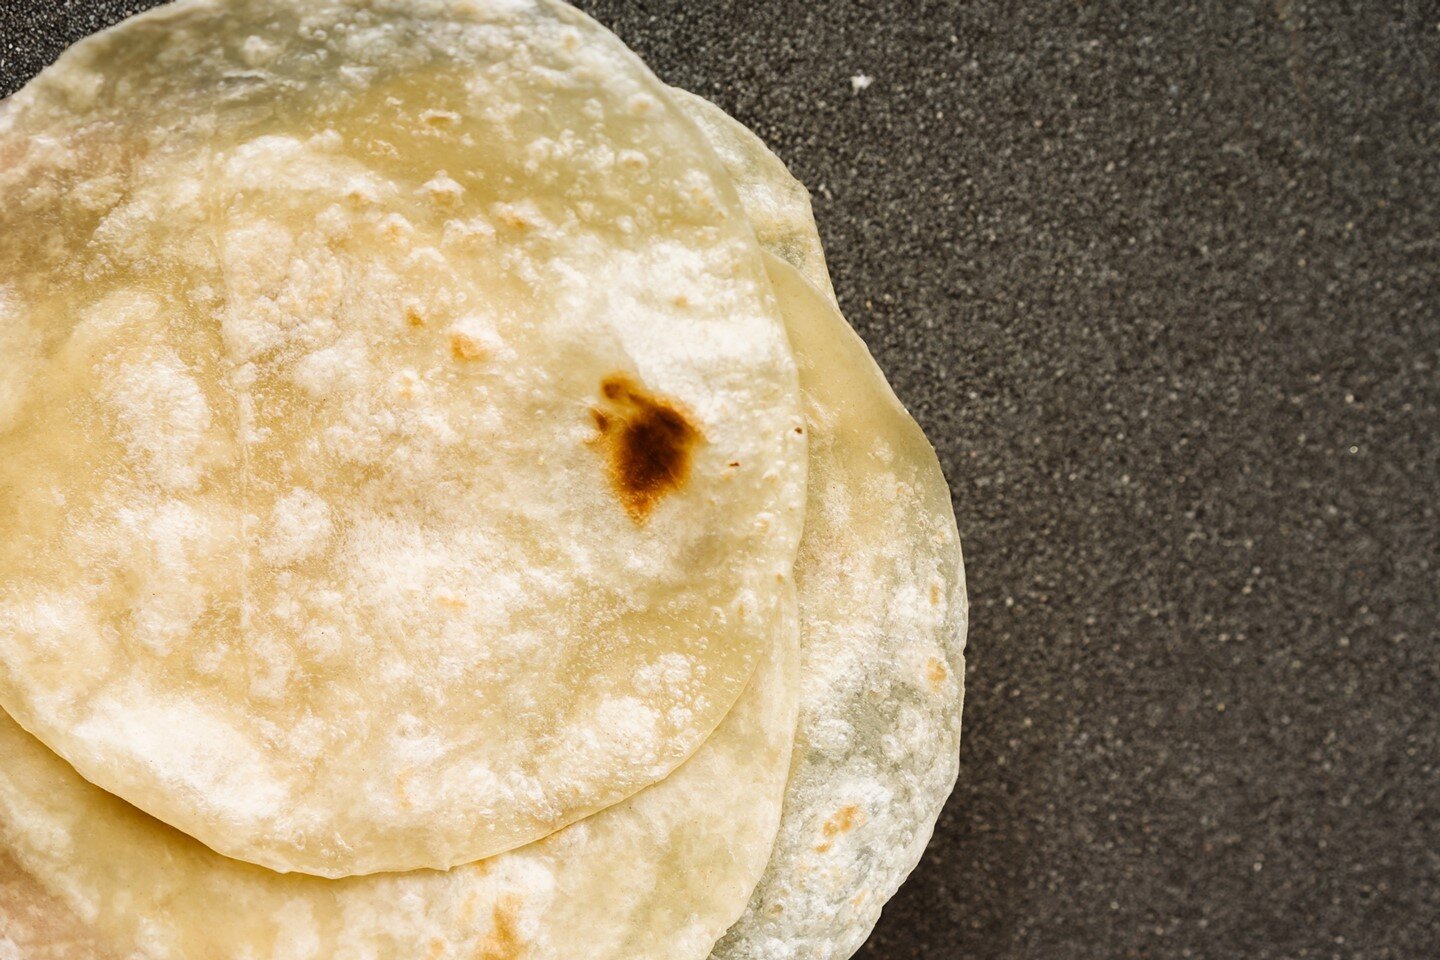 Who doesn't love a fresh made tortilla? These flour beauties are a true Bullard classic and they are comin' back! 👉 ⁠Also, RESERVATIONS ARE OPEN! 🎉 Just hit the &ldquo;Reserve&rdquo; button in our profile and set yourself up for dinner ASAP!⁠
⁠
⁠
⁠